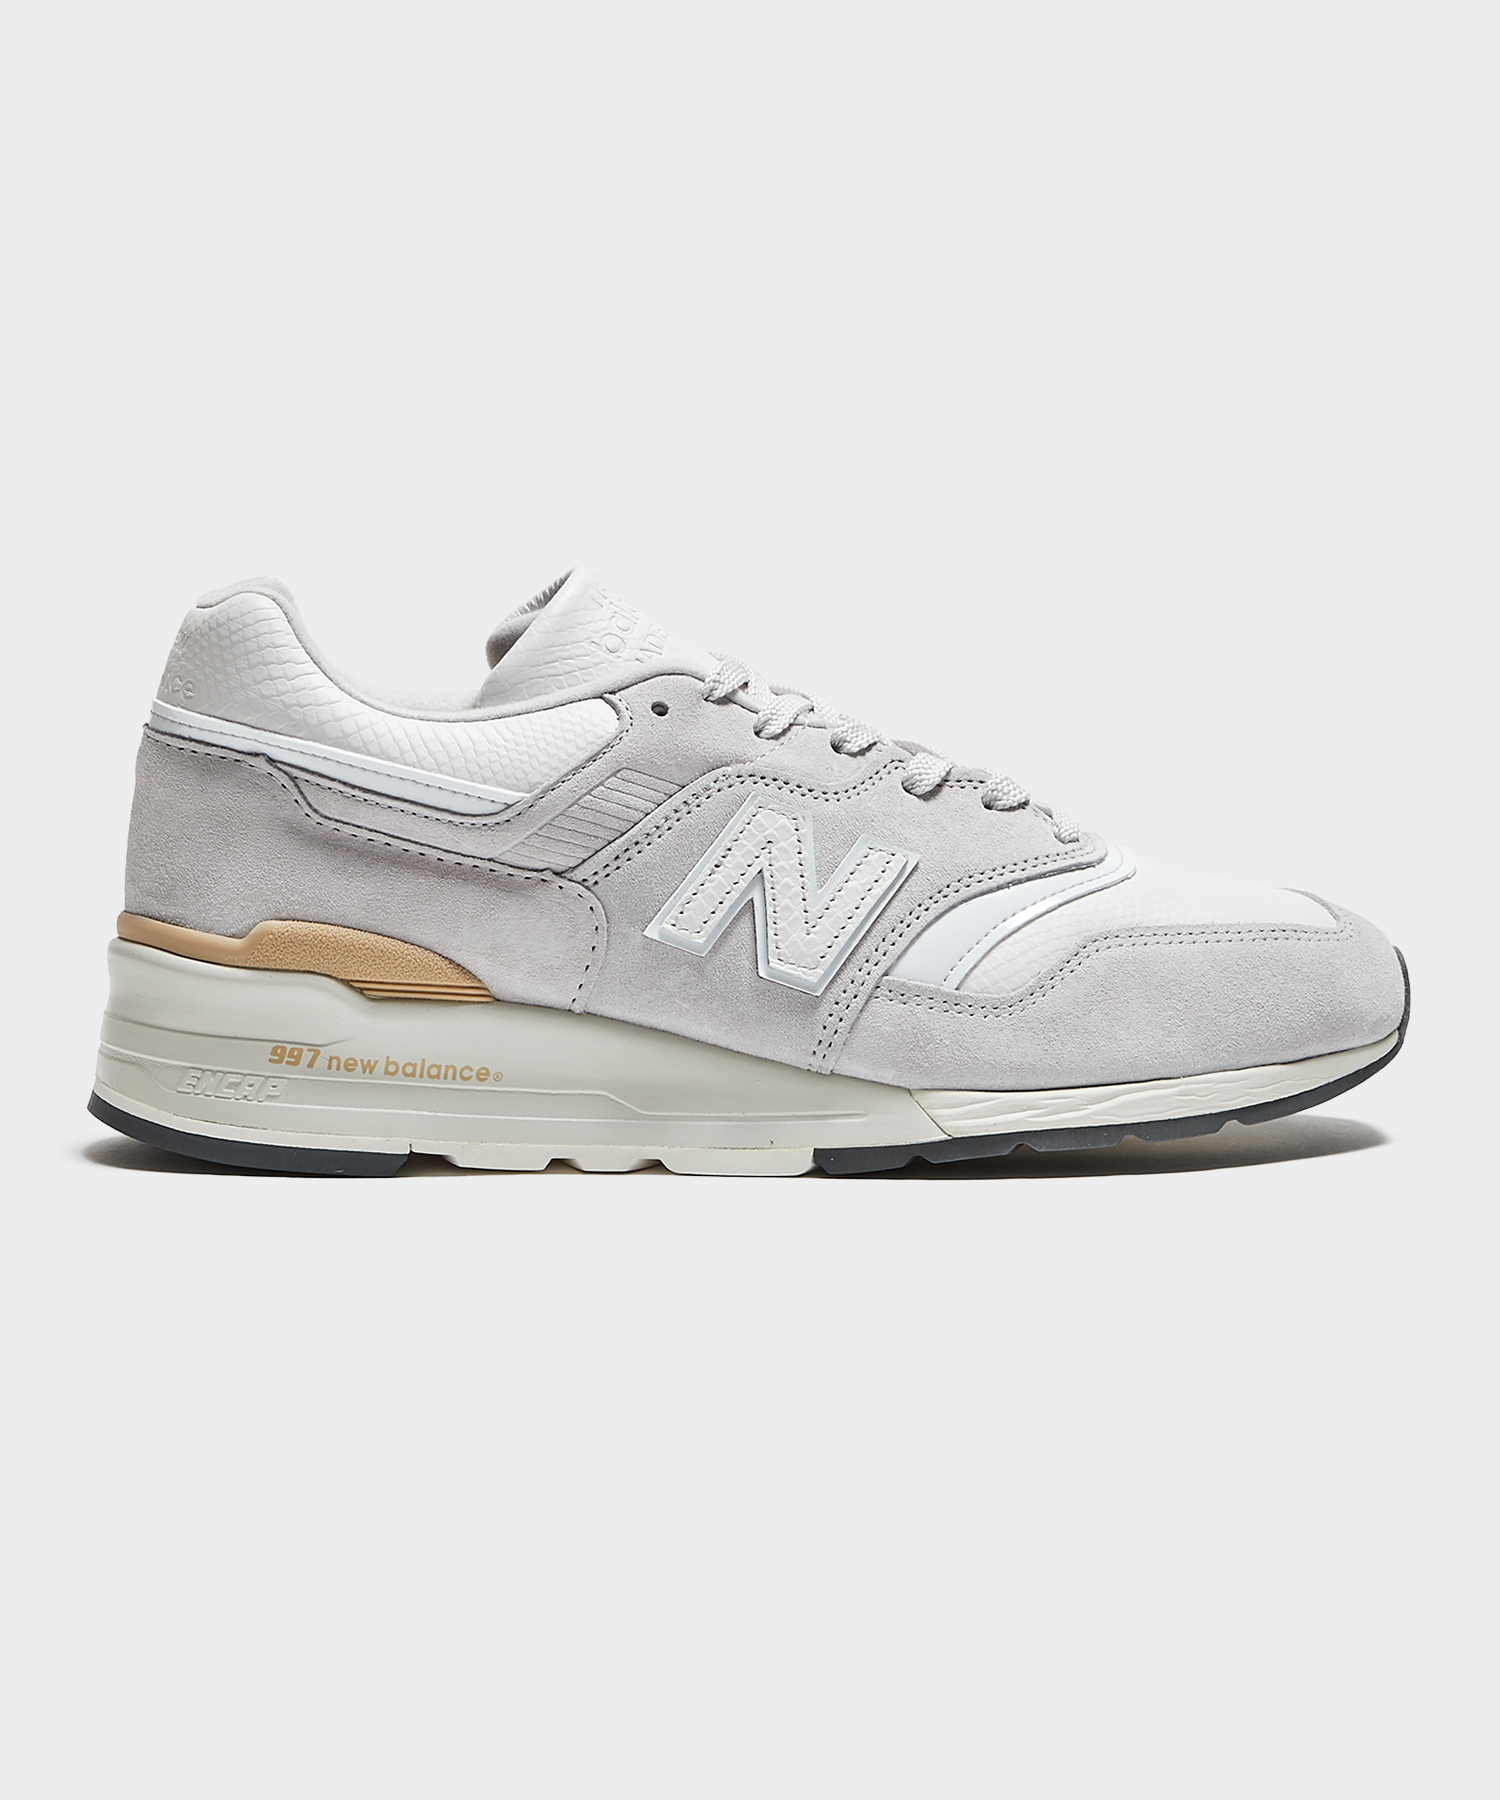 New Balance And Todd Snyder Debut Fresh Take On Classic 997 Sneakers Maxim